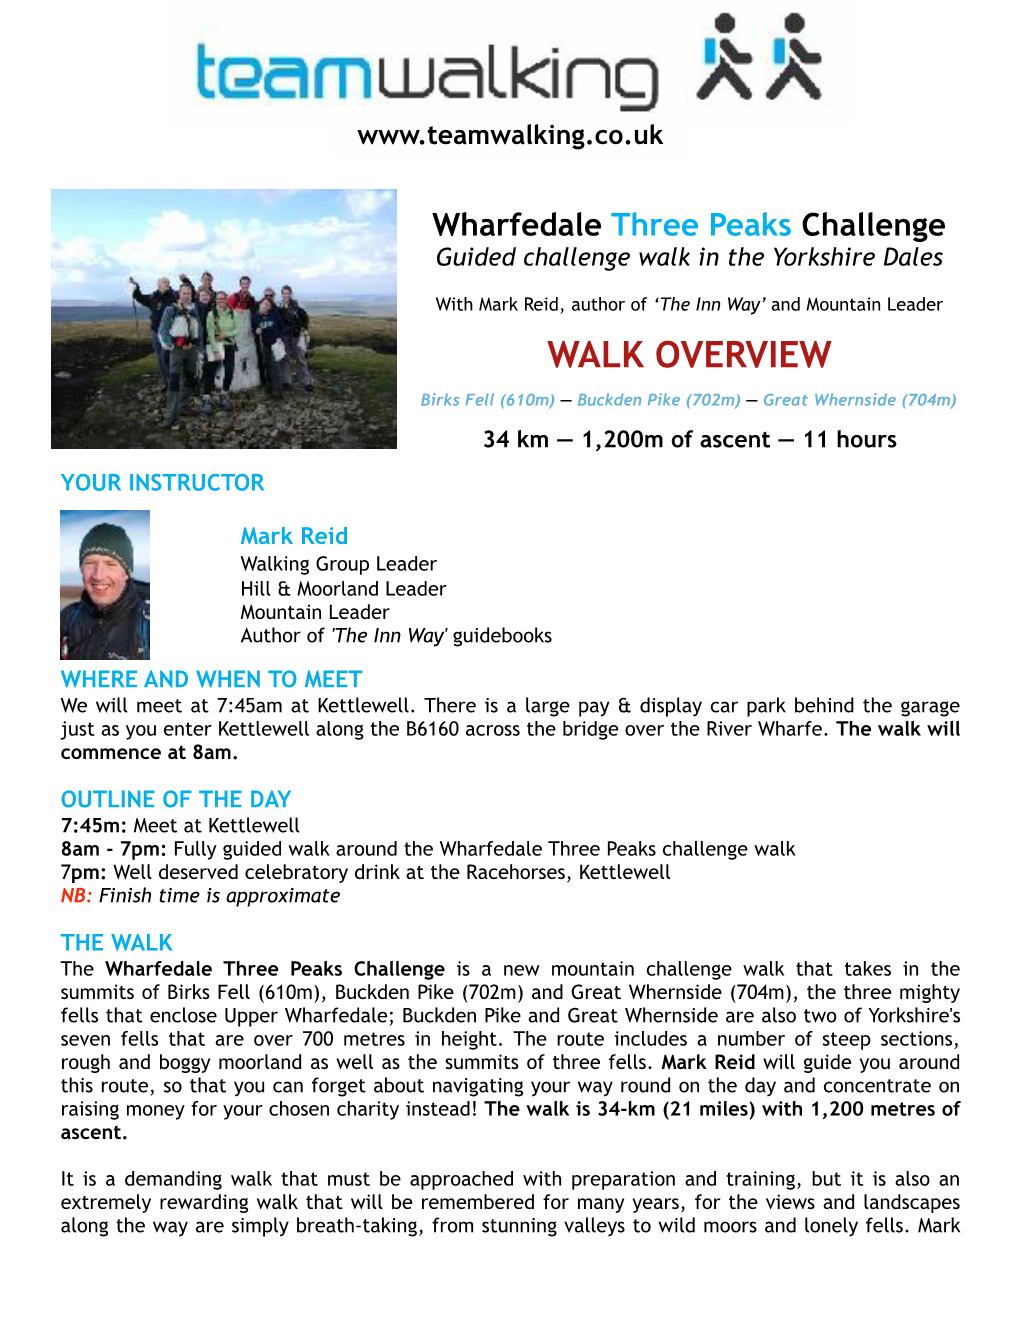 Wharfedale Three Peaks Challenge Guided Challenge Walk in the Yorkshire Dales